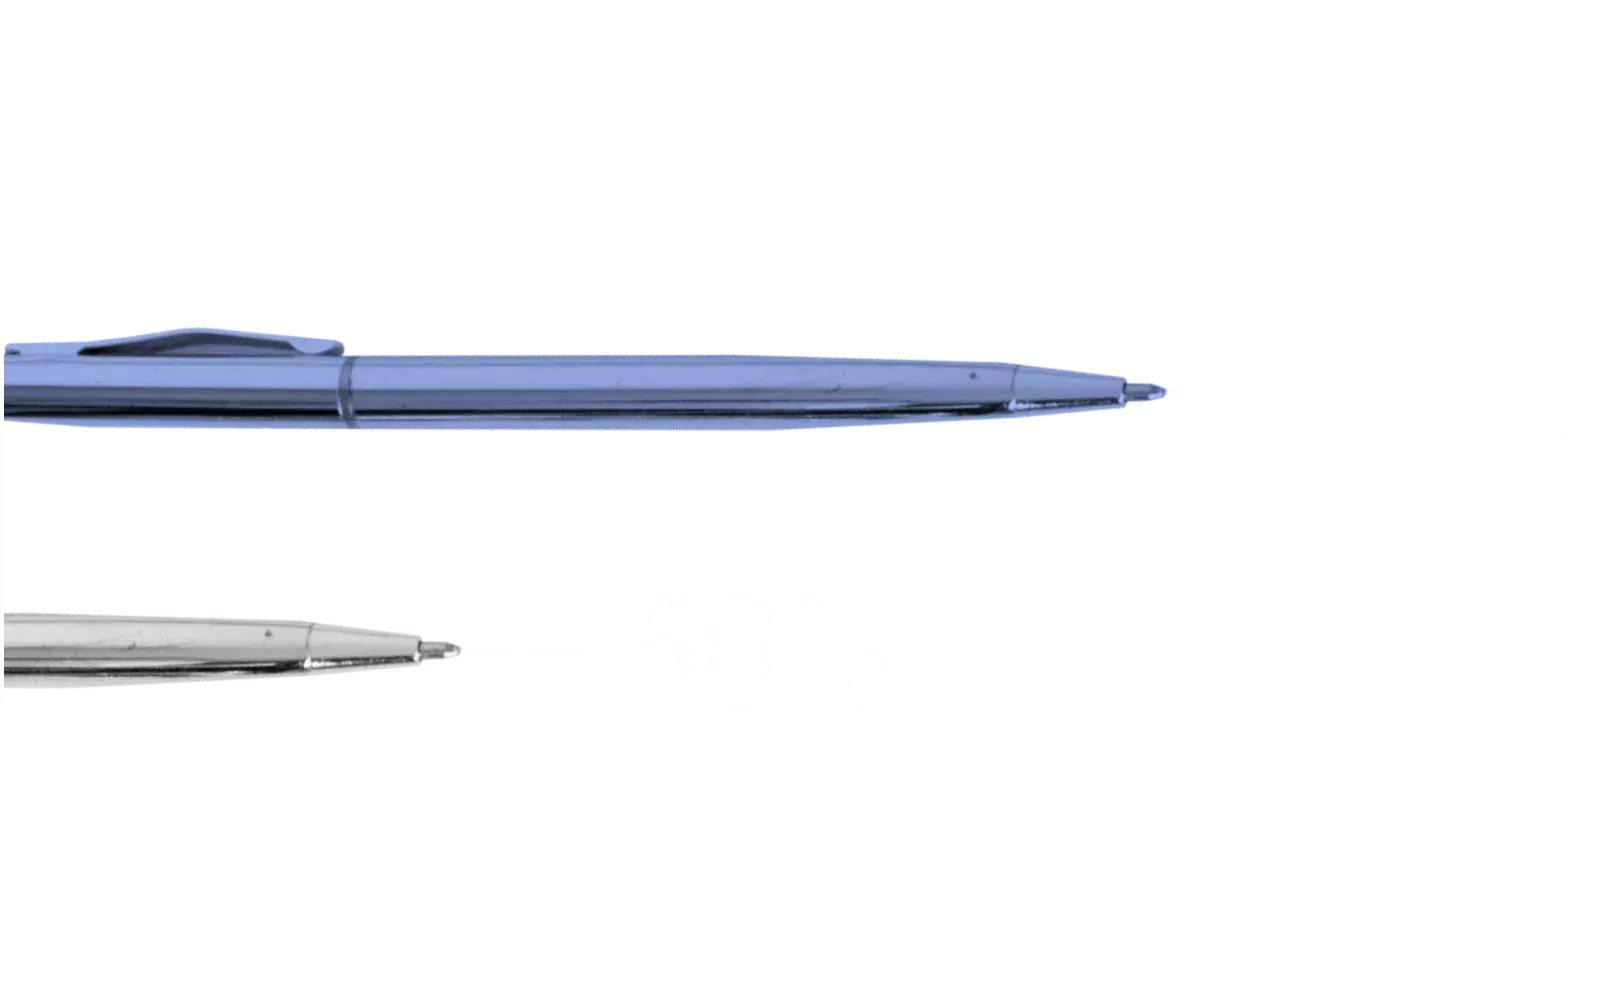 A graph signifying 92%, leading 50% of competitor performance